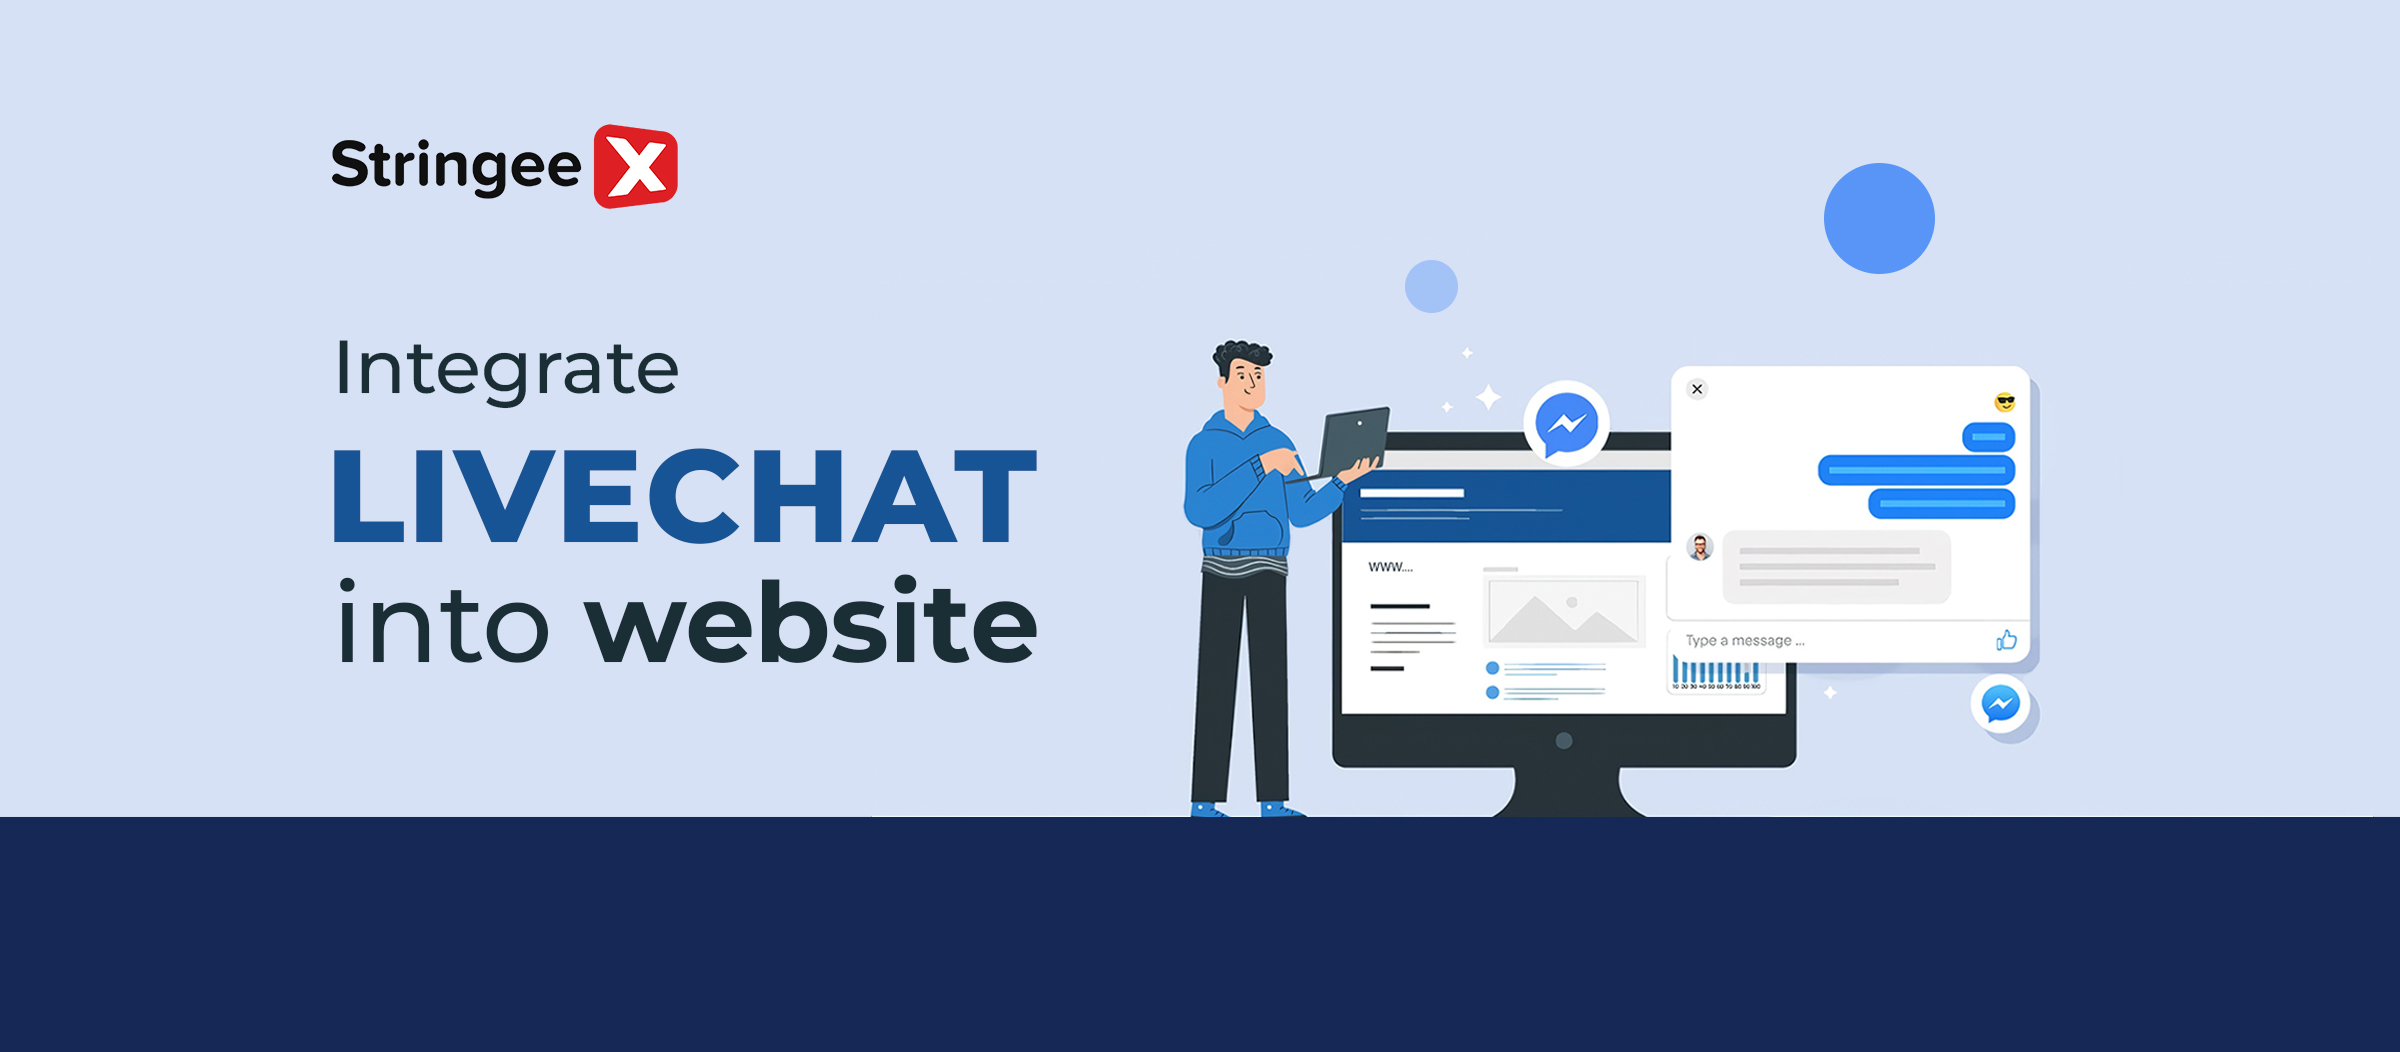 Instructions for integrating Live Chat into the website: Optimize customer interaction